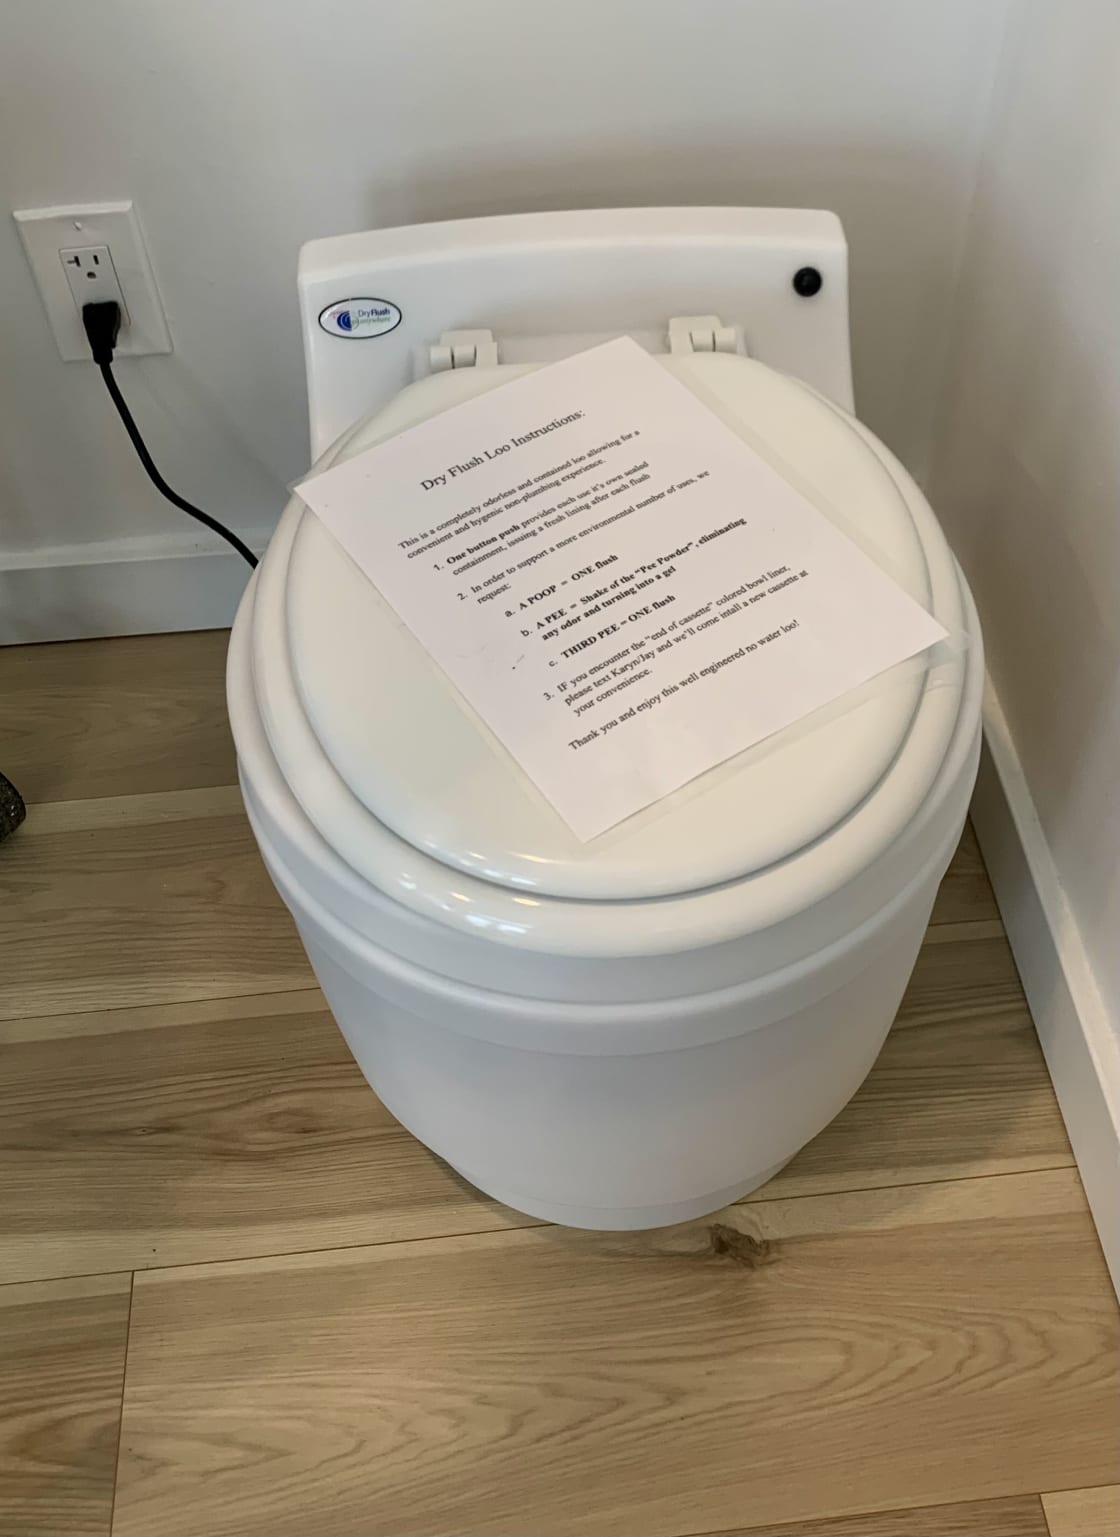 The dry flush toilet was easy to use and clean